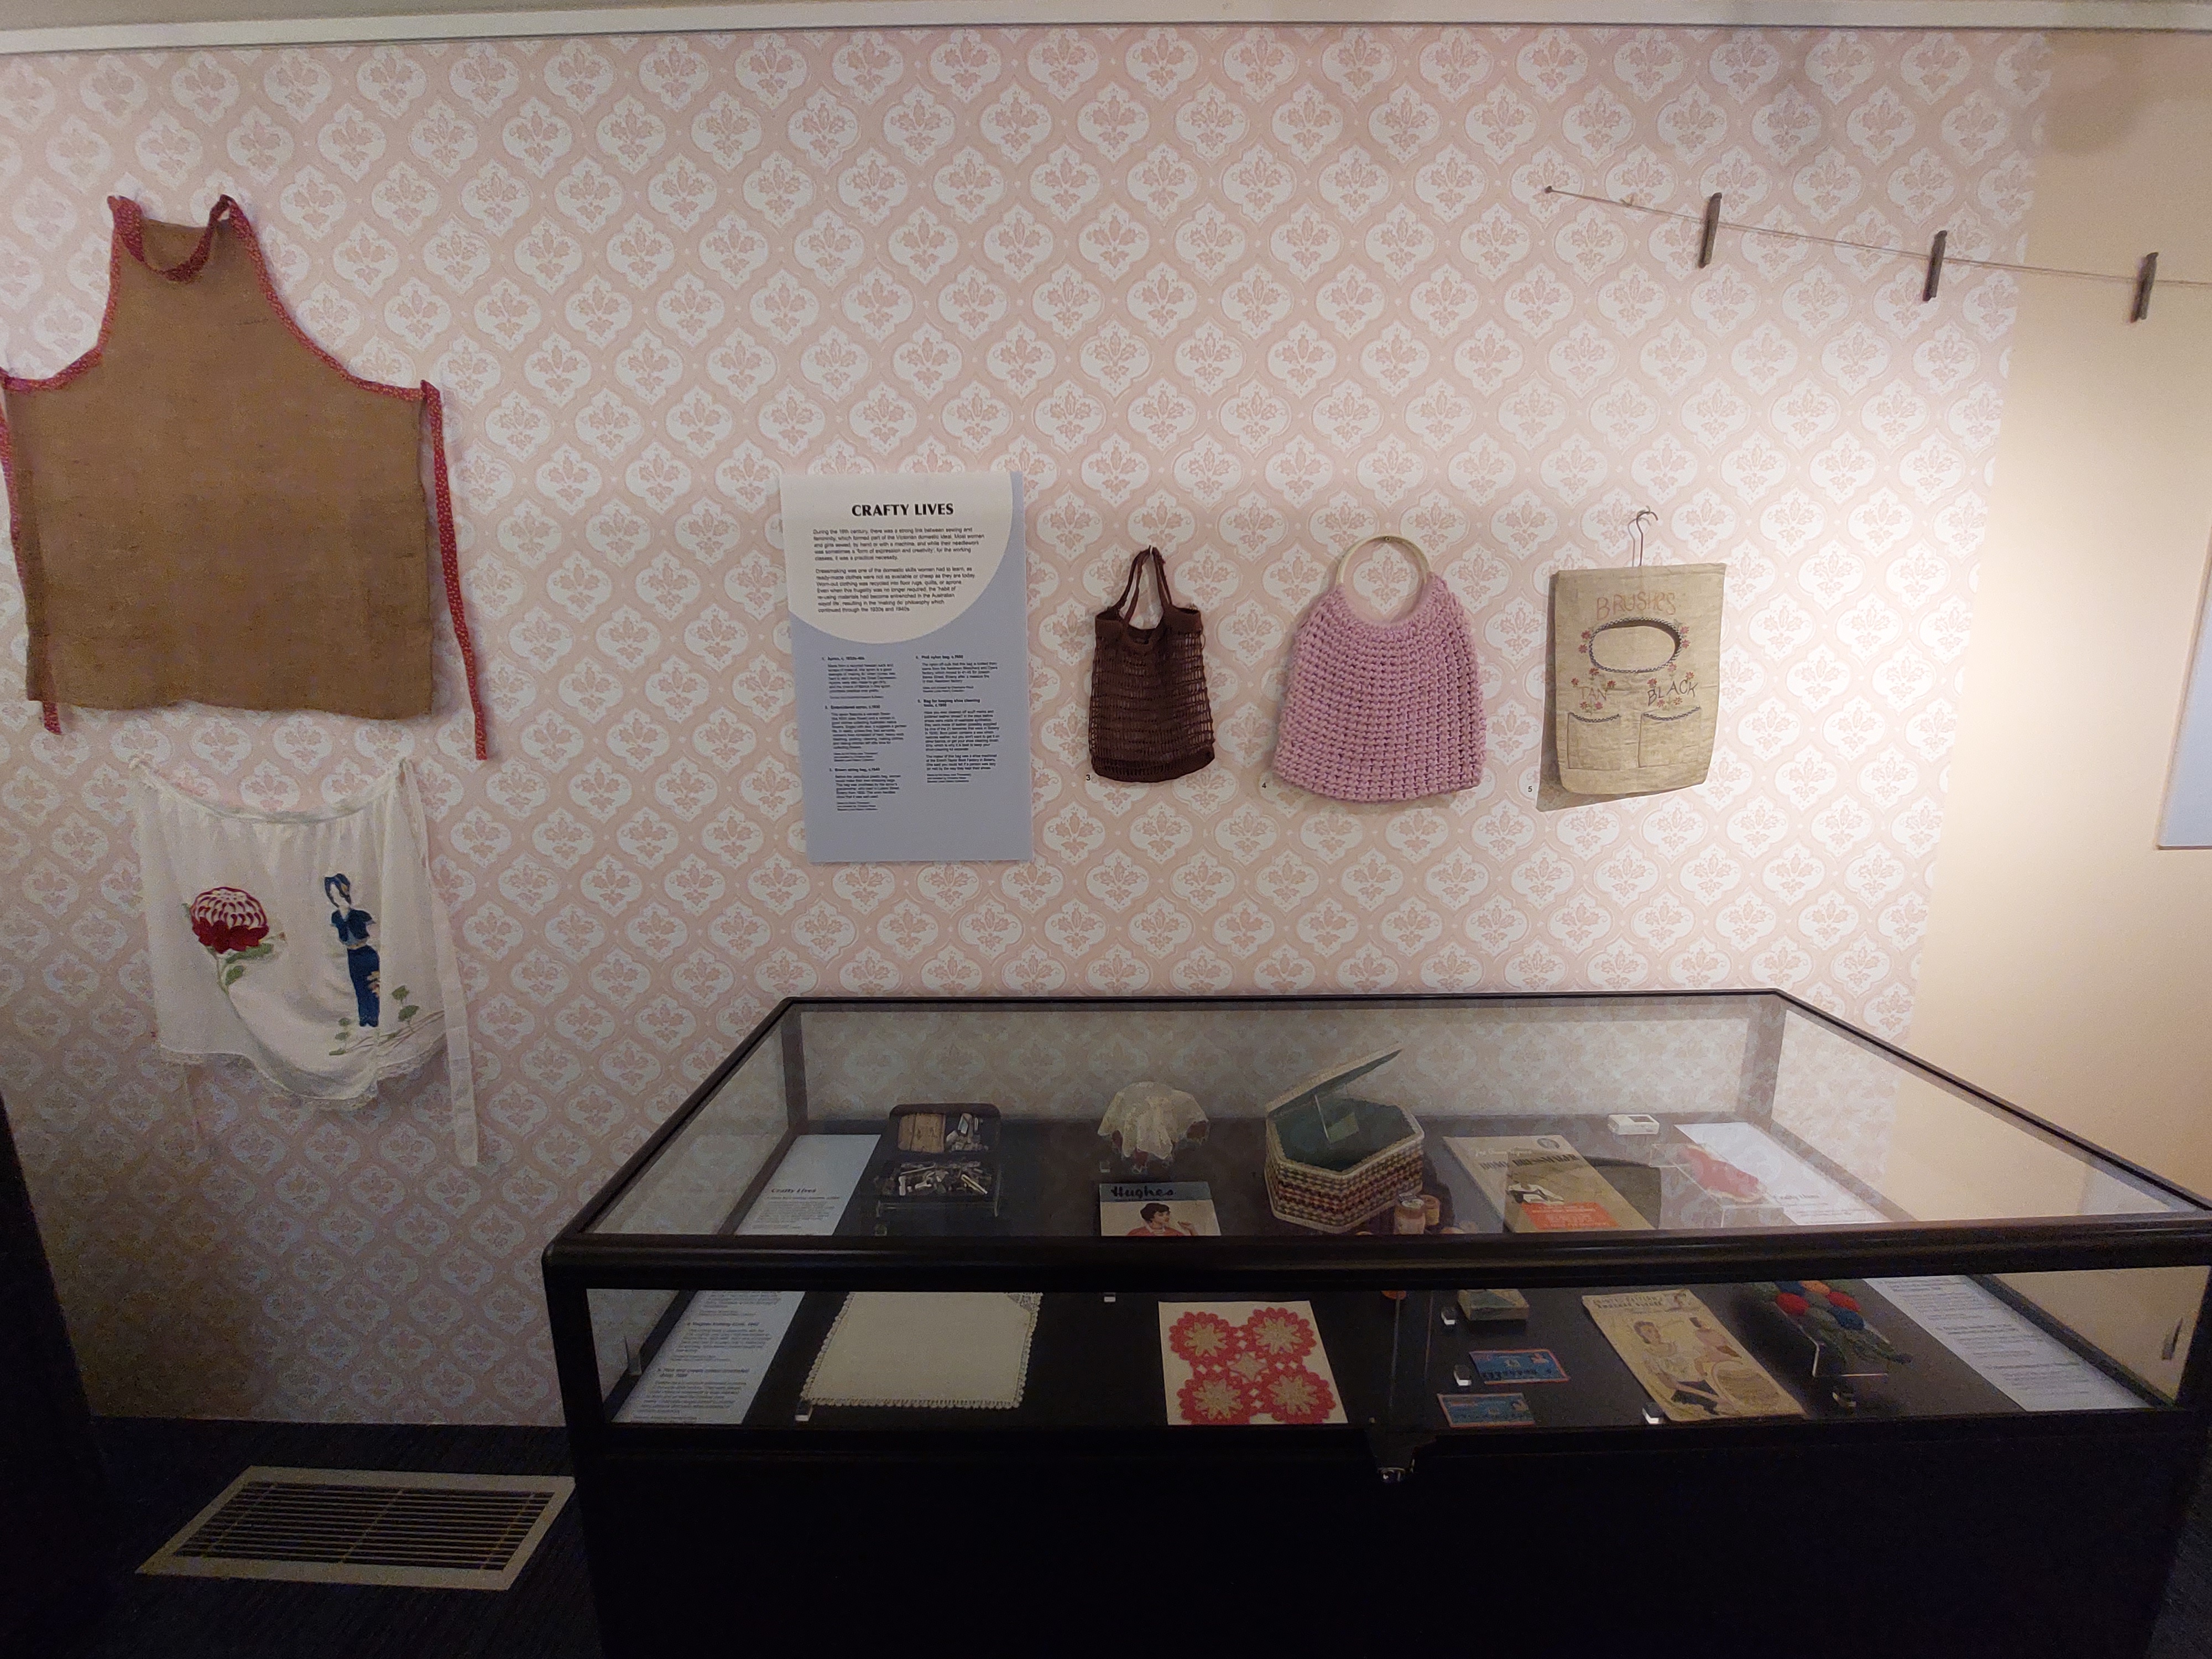 image of photos and artefacts at the exhibition